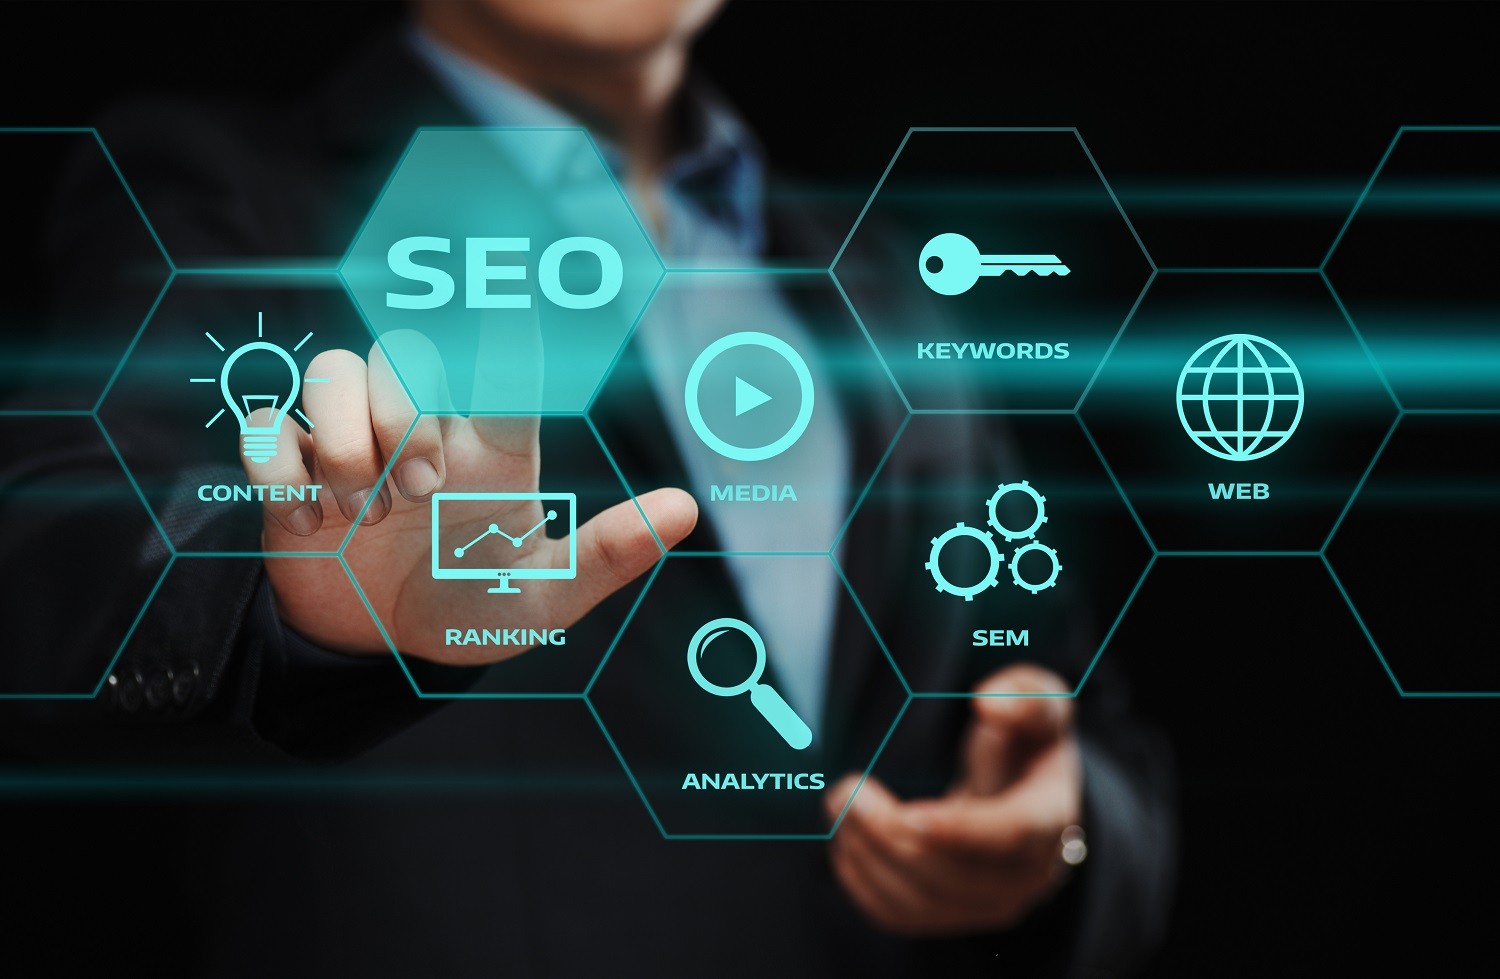 How to measure the success of your SEO efforts